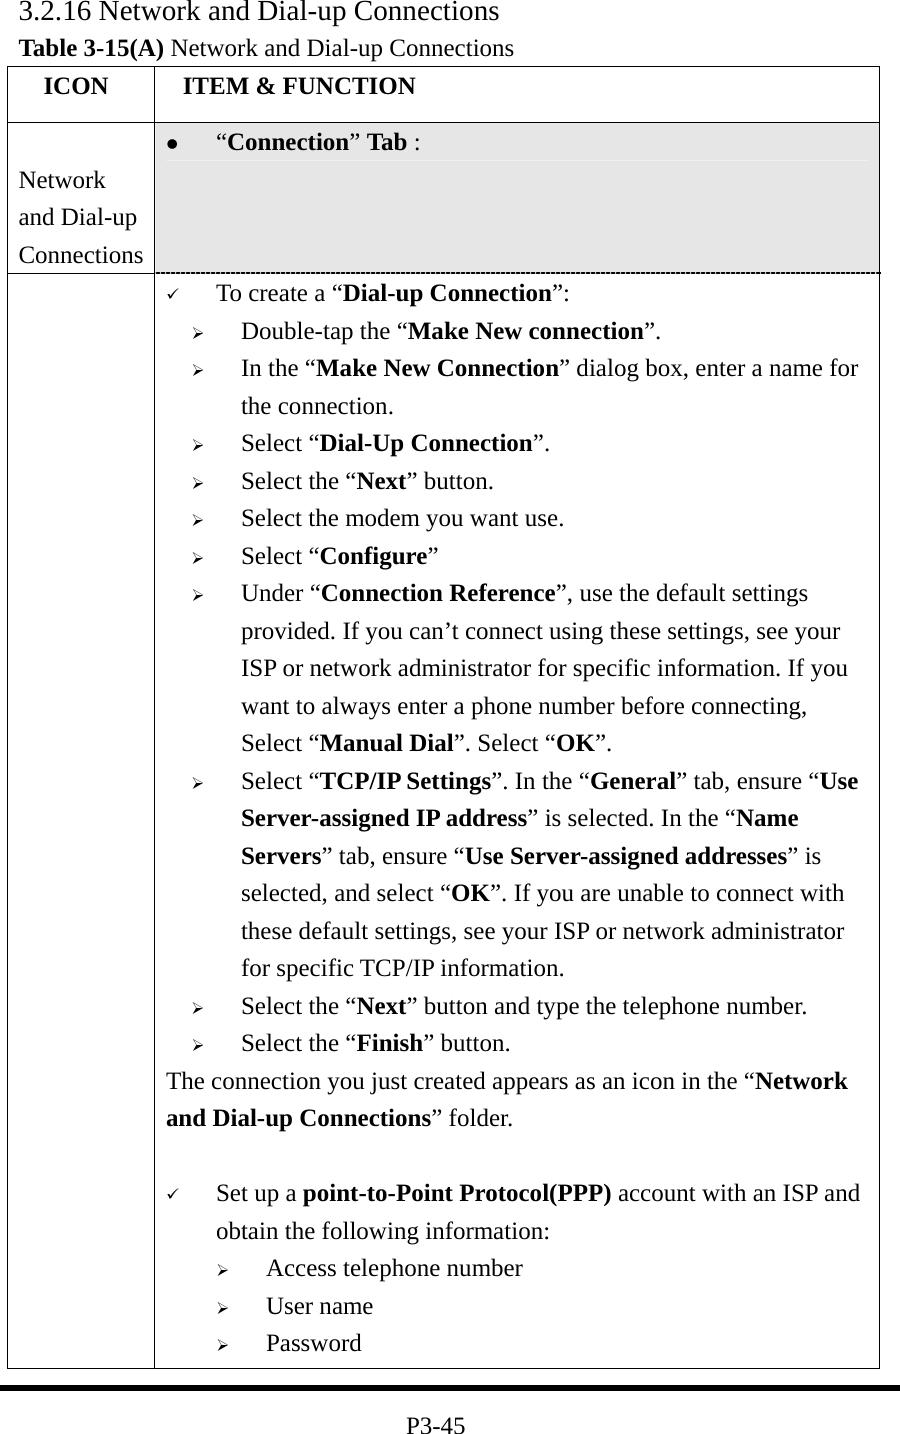 3.2.16 Network and Dial-up Connections Table 3-15(A) Network and Dial-up Connections   ICON   ITEM &amp; FUNCTION  Network and Dial-up Connections   “Connection” Tab :      To create a “Dial-up Connection”:   Double-tap the “Make New connection”.   In the “Make New Connection” dialog box, enter a name for the connection.   Select “Dial-Up Connection”.   Select the “Next” button.   Select the modem you want use.   Select “Configure”   Under “Connection Reference”, use the default settings provided. If you can’t connect using these settings, see your ISP or network administrator for specific information. If you want to always enter a phone number before connecting, Select “Manual Dial”. Select “OK”.   Select “TCP/IP Settings”. In the “General” tab, ensure “Use Server-assigned IP address” is selected. In the “Name Servers” tab, ensure “Use Server-assigned addresses” is selected, and select “OK”. If you are unable to connect with these default settings, see your ISP or network administrator for specific TCP/IP information.   Select the “Next” button and type the telephone number.   Select the “Finish” button. The connection you just created appears as an icon in the “Network and Dial-up Connections” folder.      Set up a point-to-Point Protocol(PPP) account with an ISP and obtain the following information:   Access telephone number   User name   Password  P3-45 